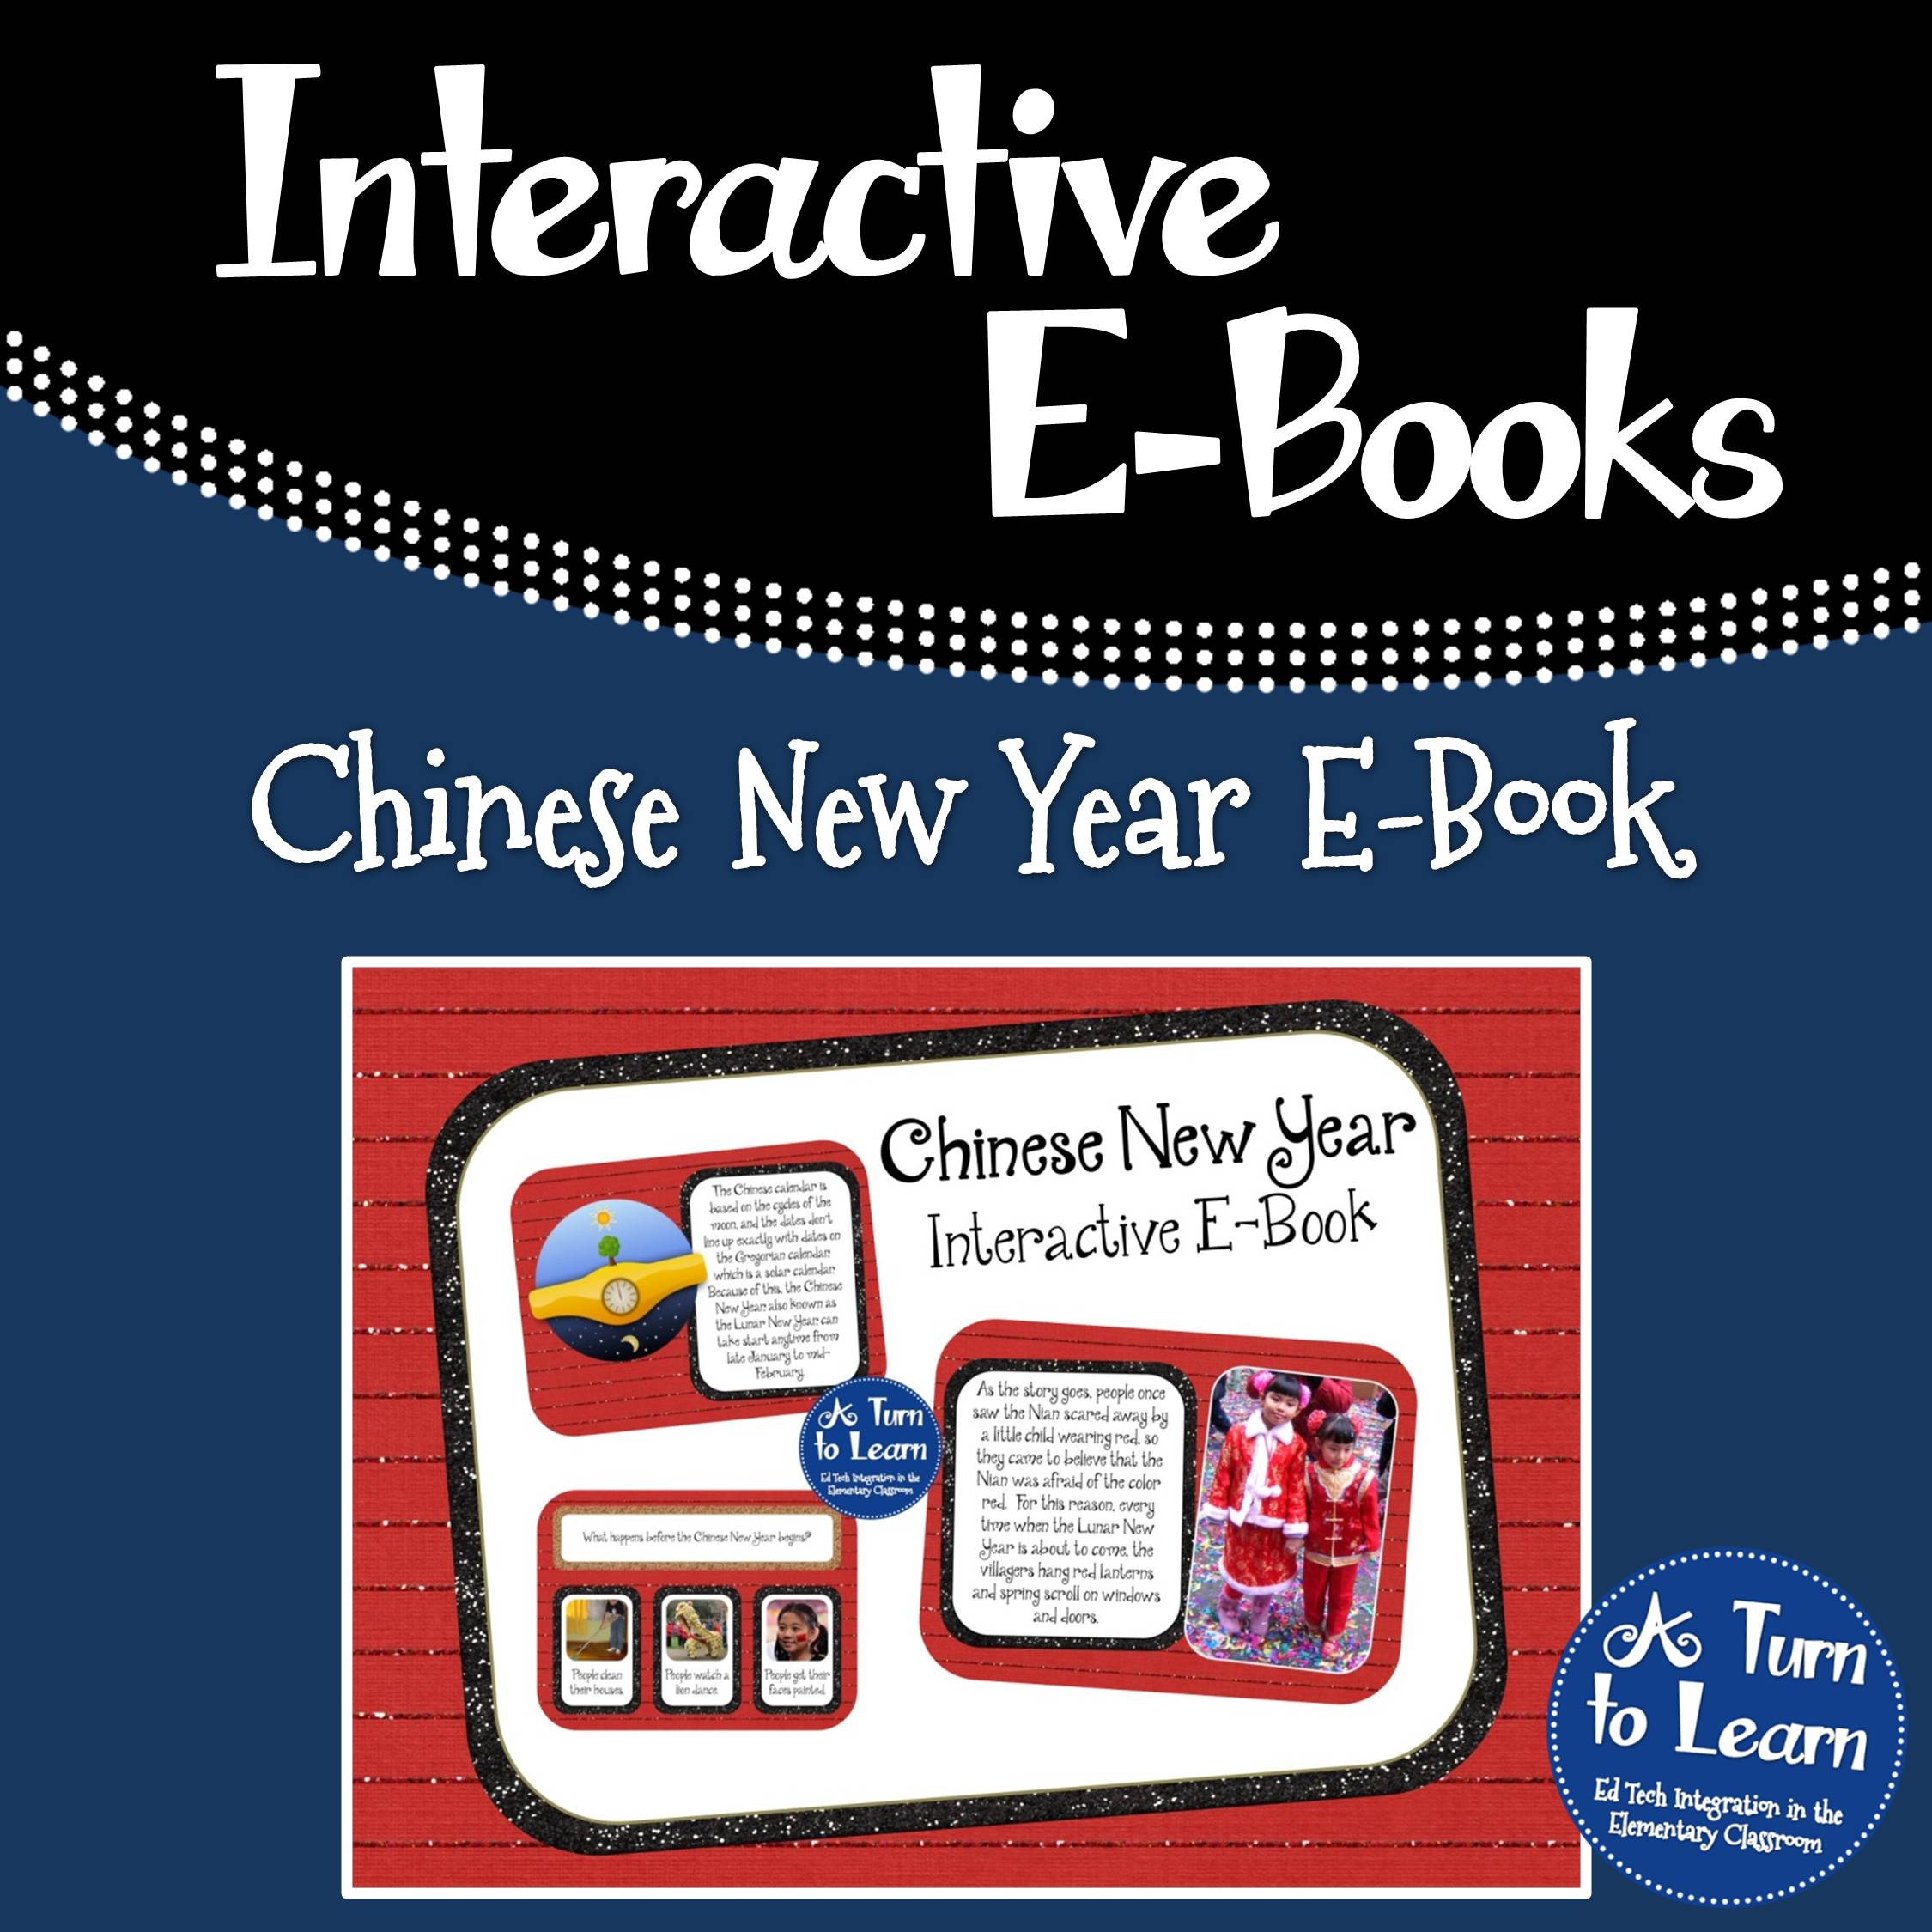 Chinese New Year Interactive E-Book. This Smartboard activity has comprehension activities to keep students engaged!